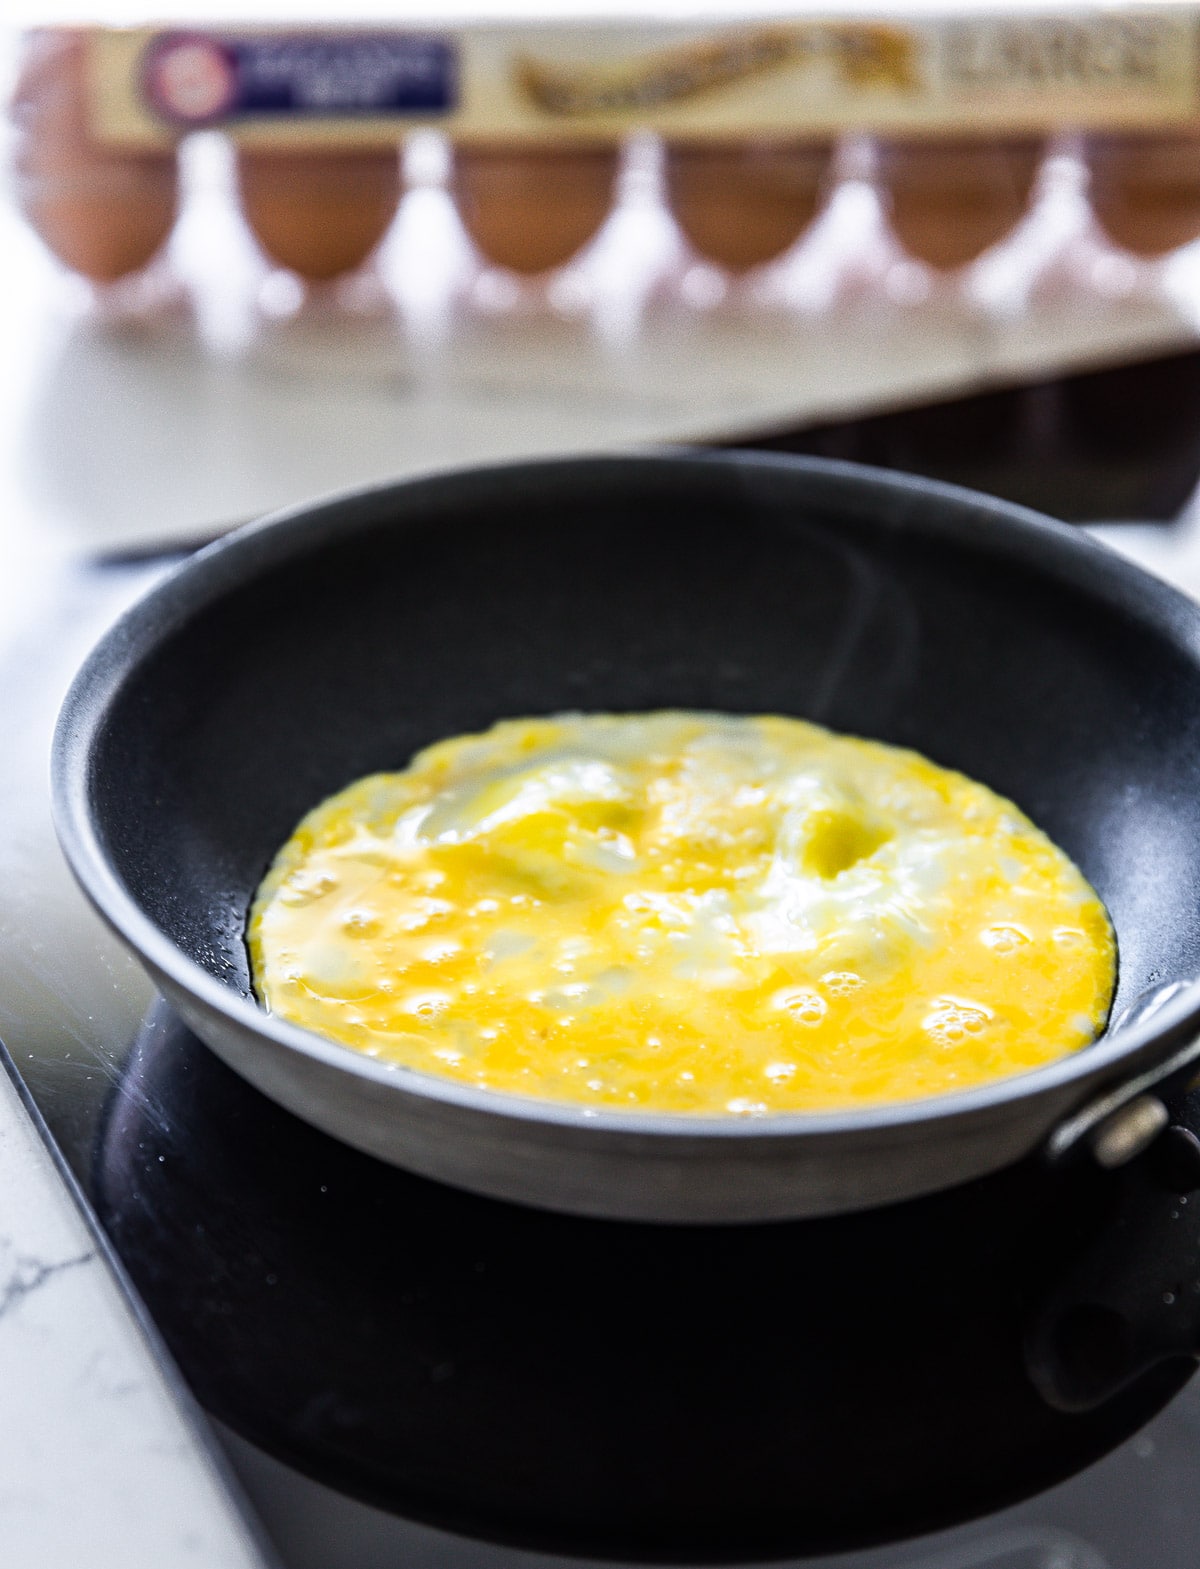 Whipped eggs cooking in small black skillet for egg wrap recipe